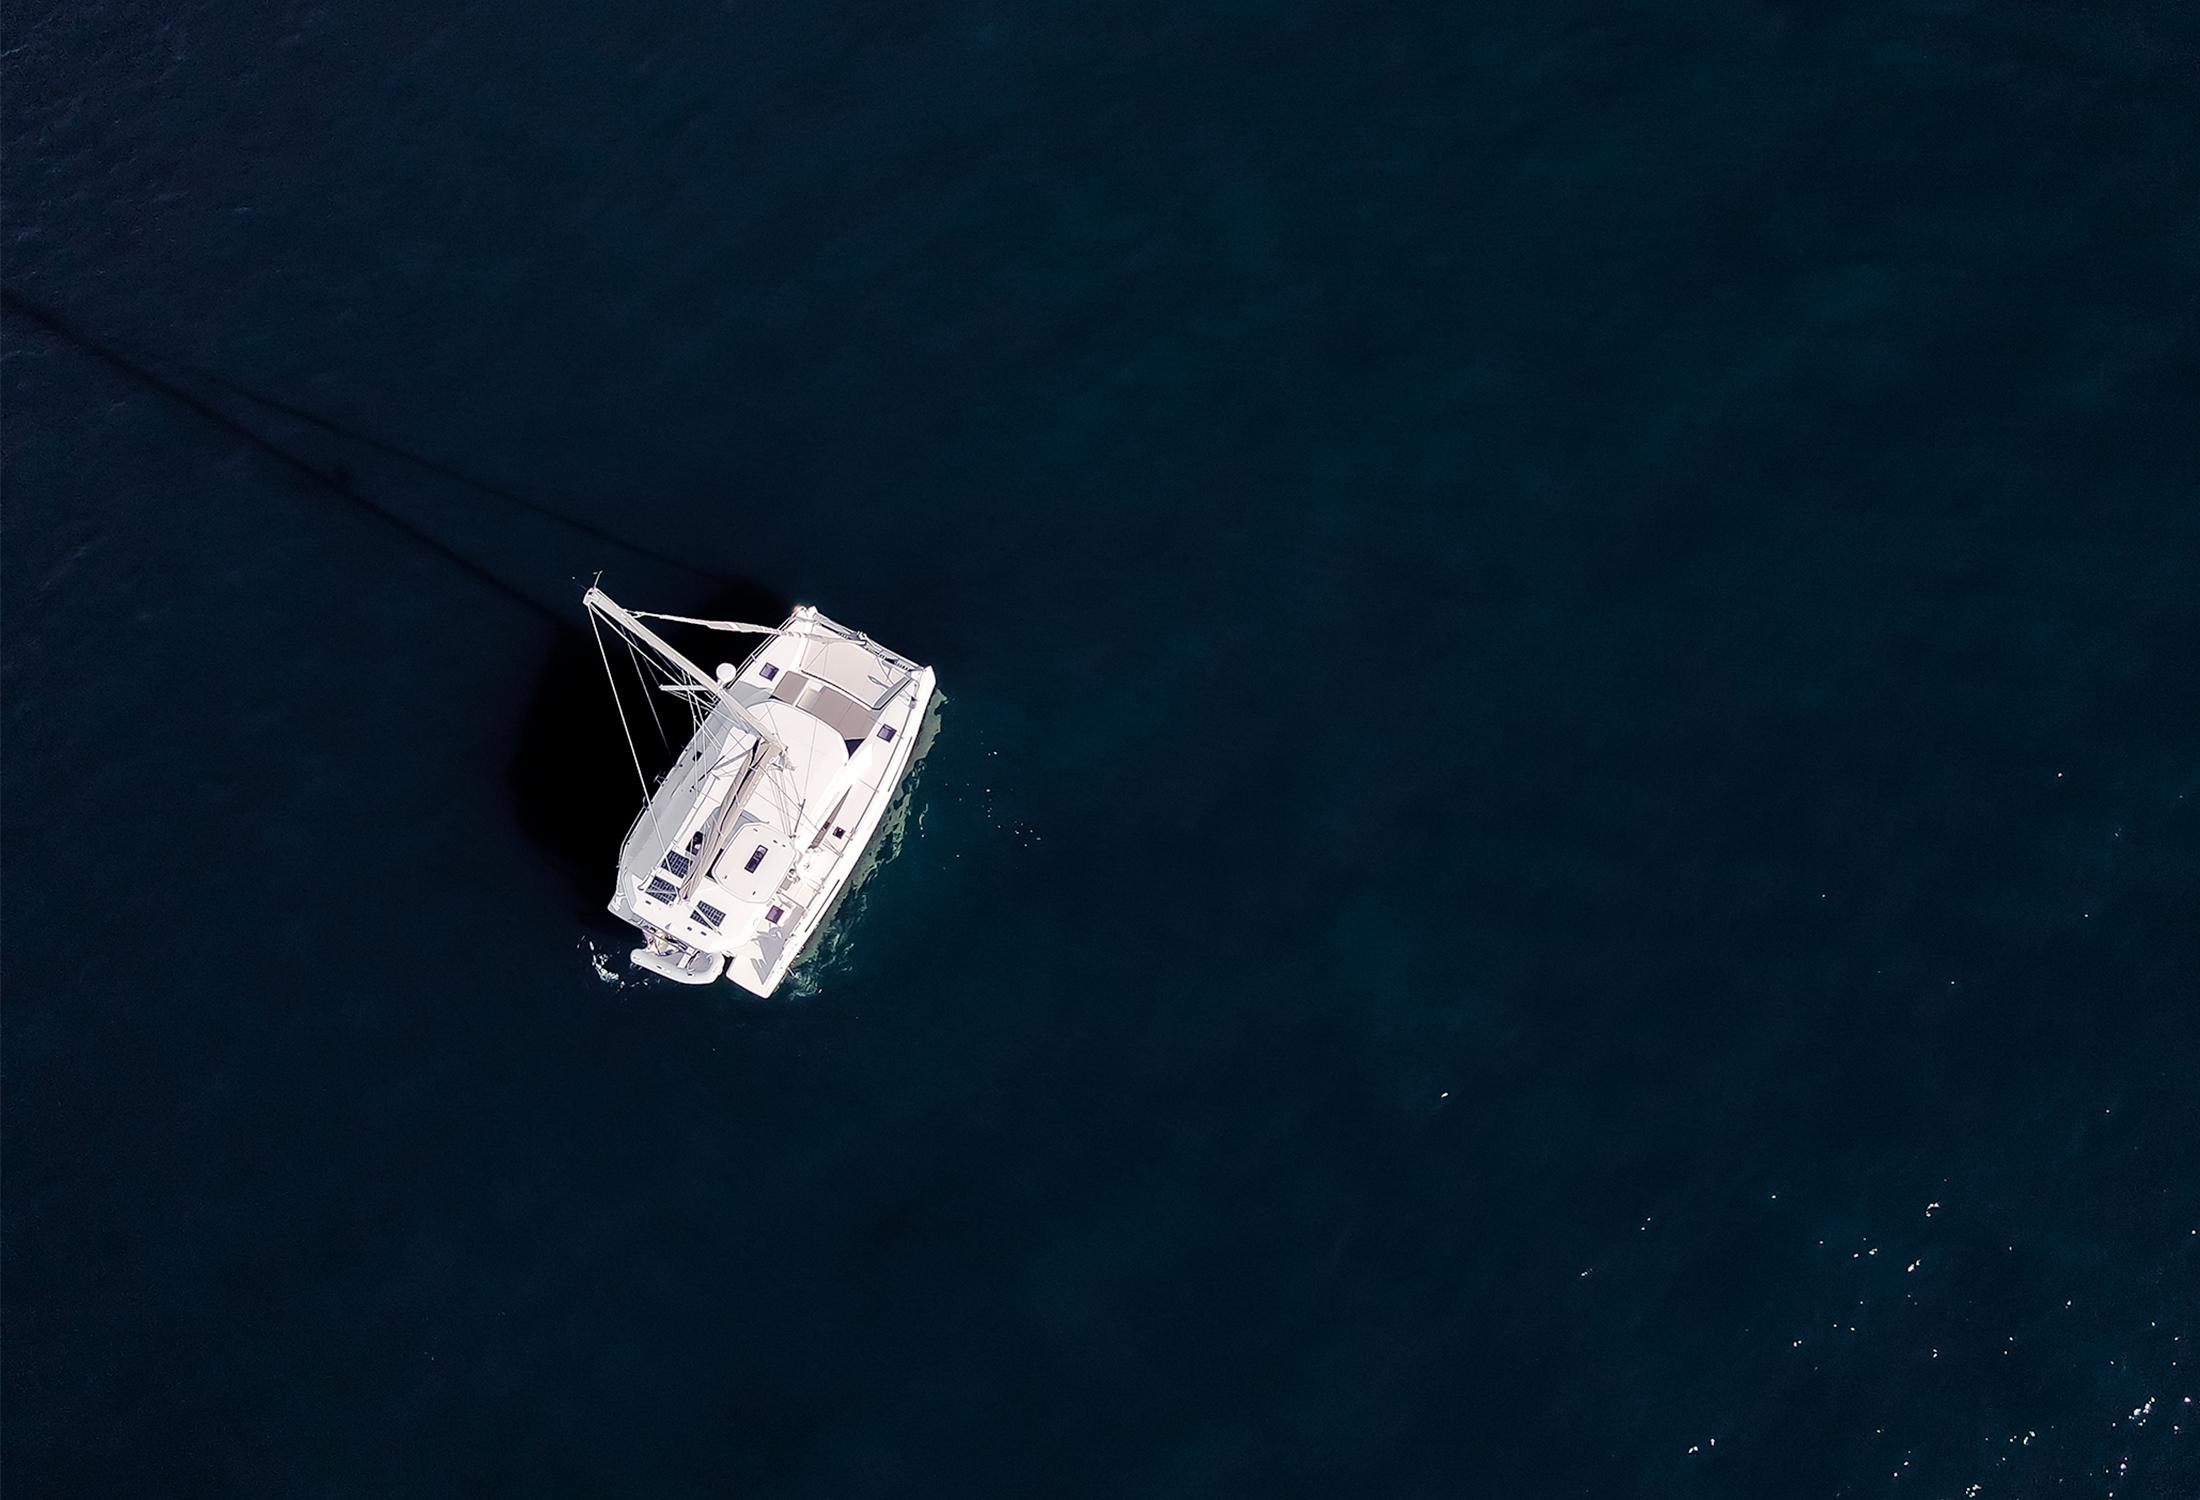 background image; a catamaran under sail from above.